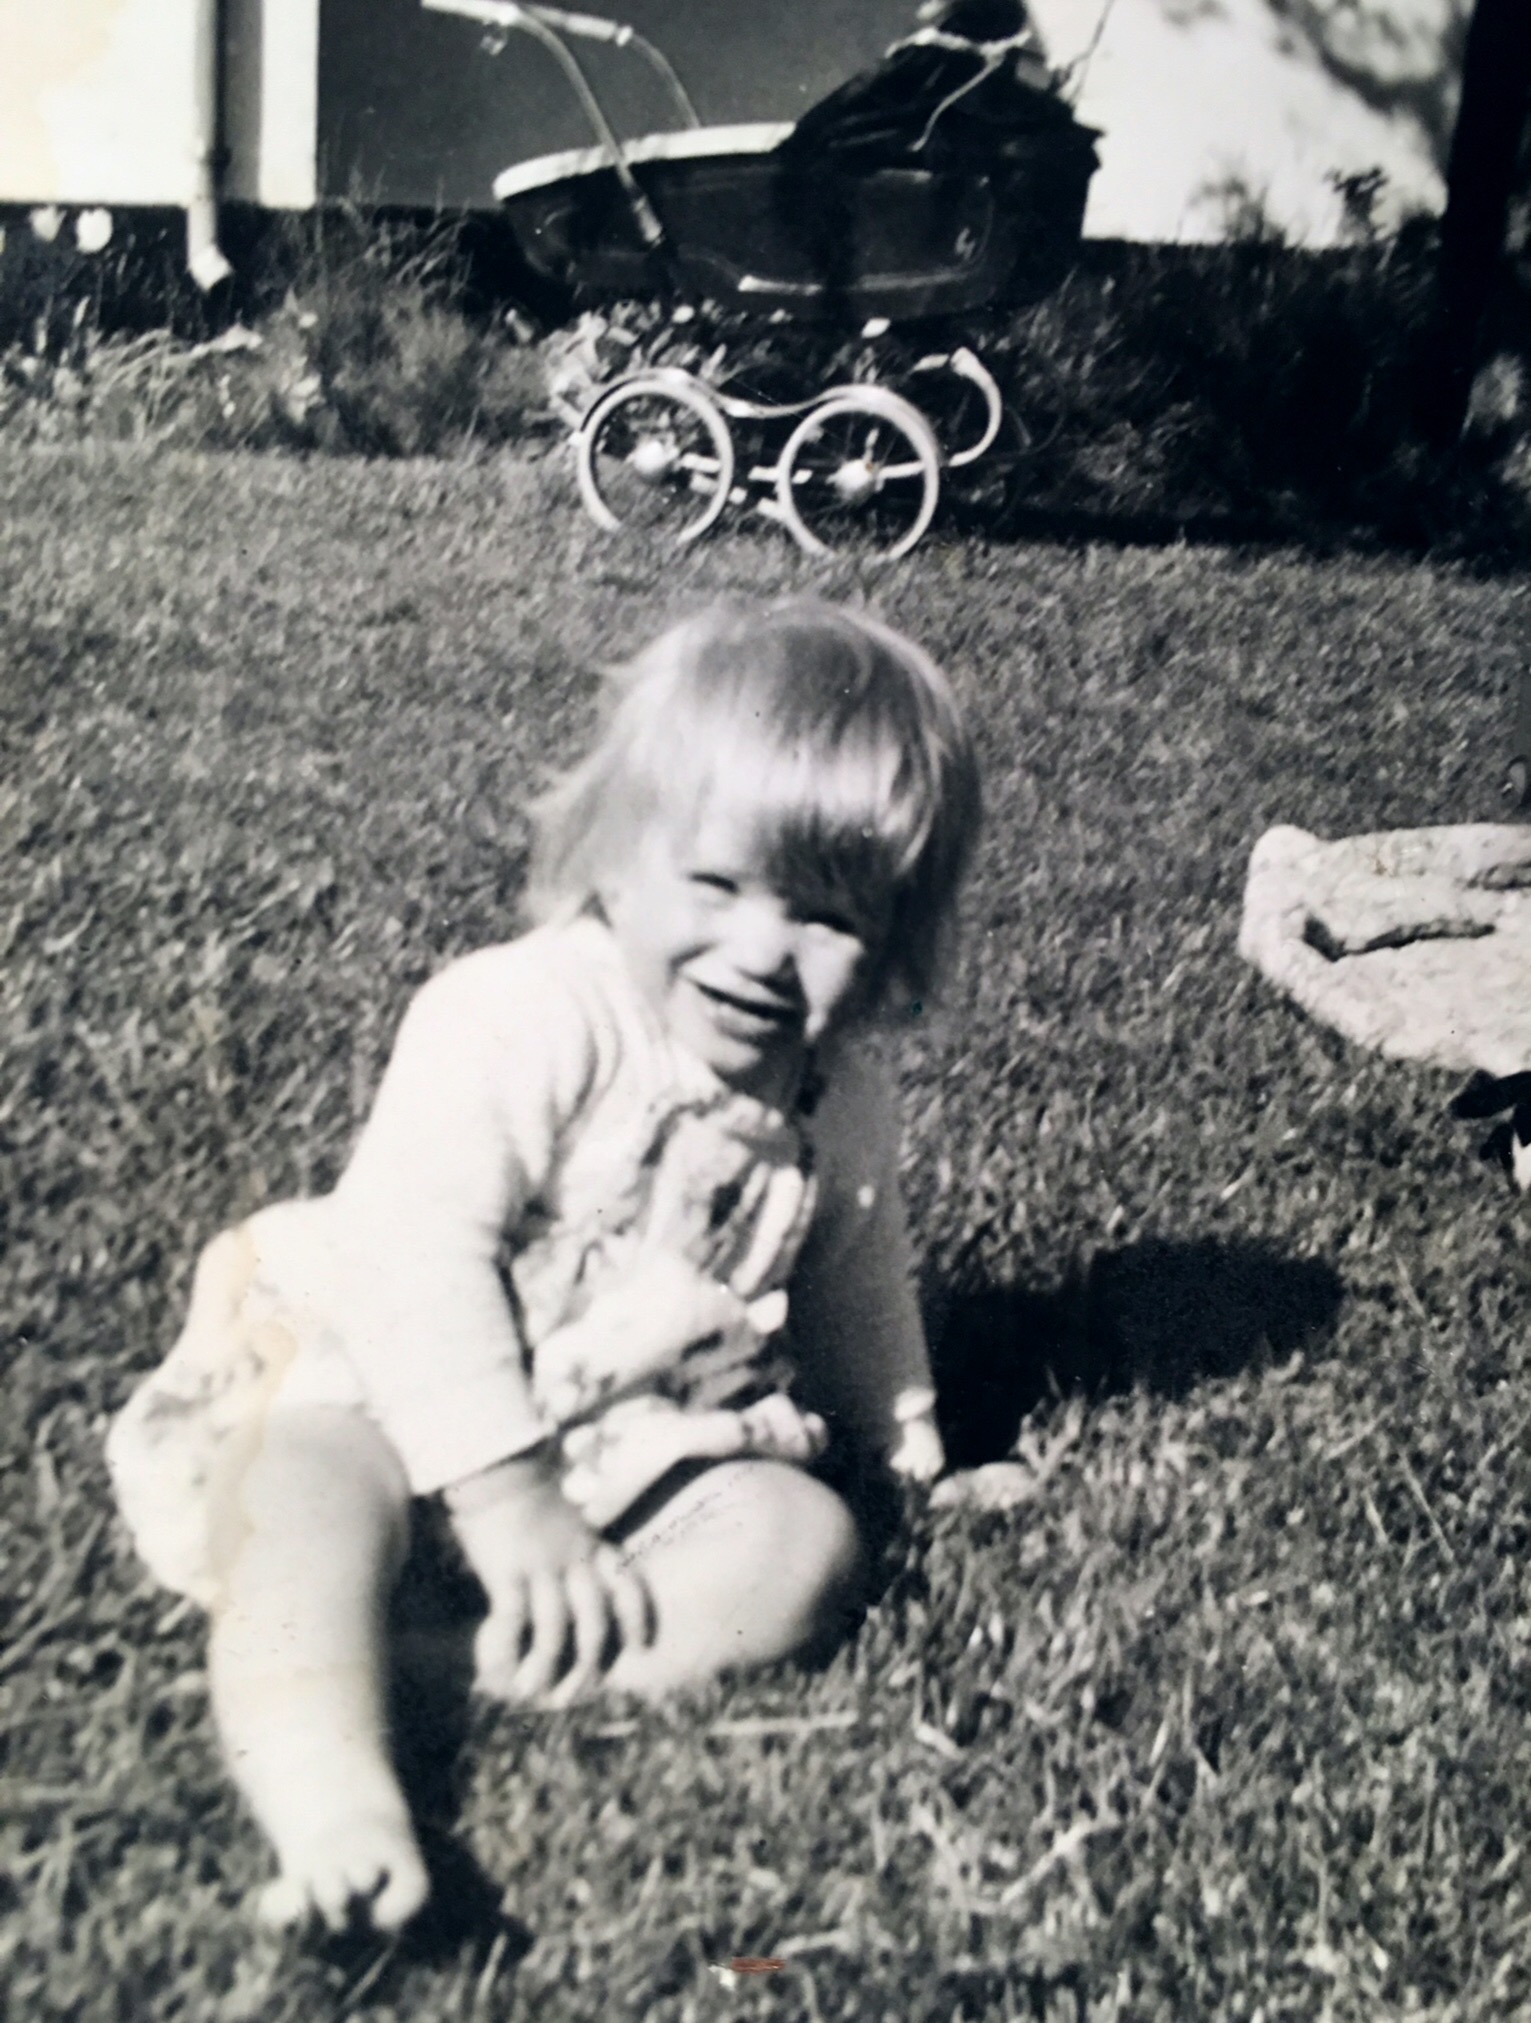 Me (about 2 years old) in the frontgarden of our house